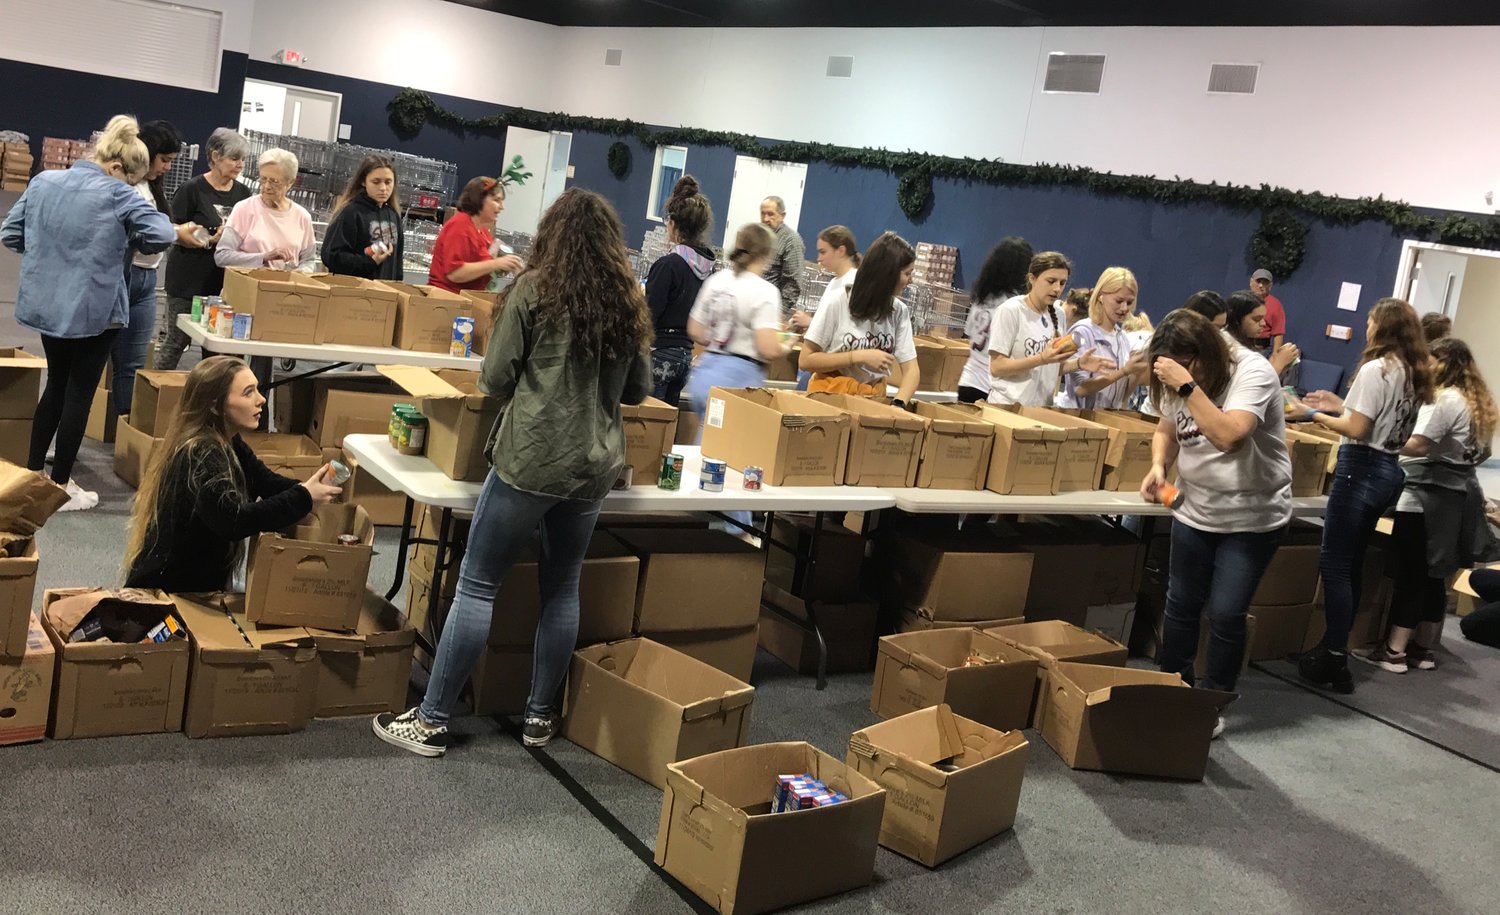 Volunteers pack food boxes during last year’s Mineola Caring and Sharing effort that reached more than 1,000 residents of the Mineola school district with food and gifts. (Courtesy photo)